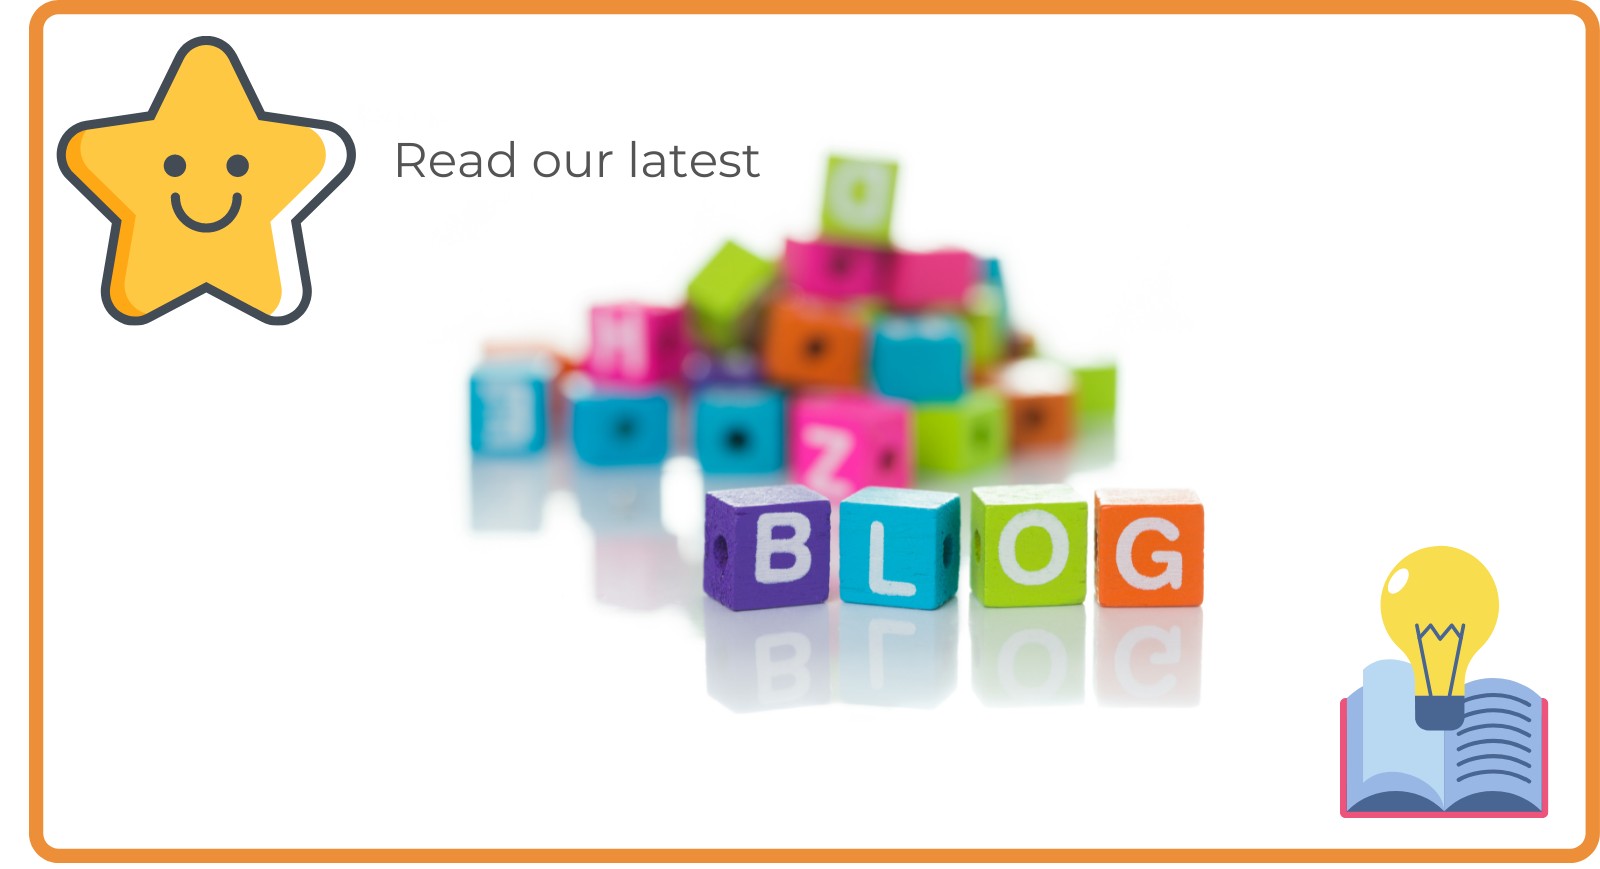 Read our latest Blog posts!